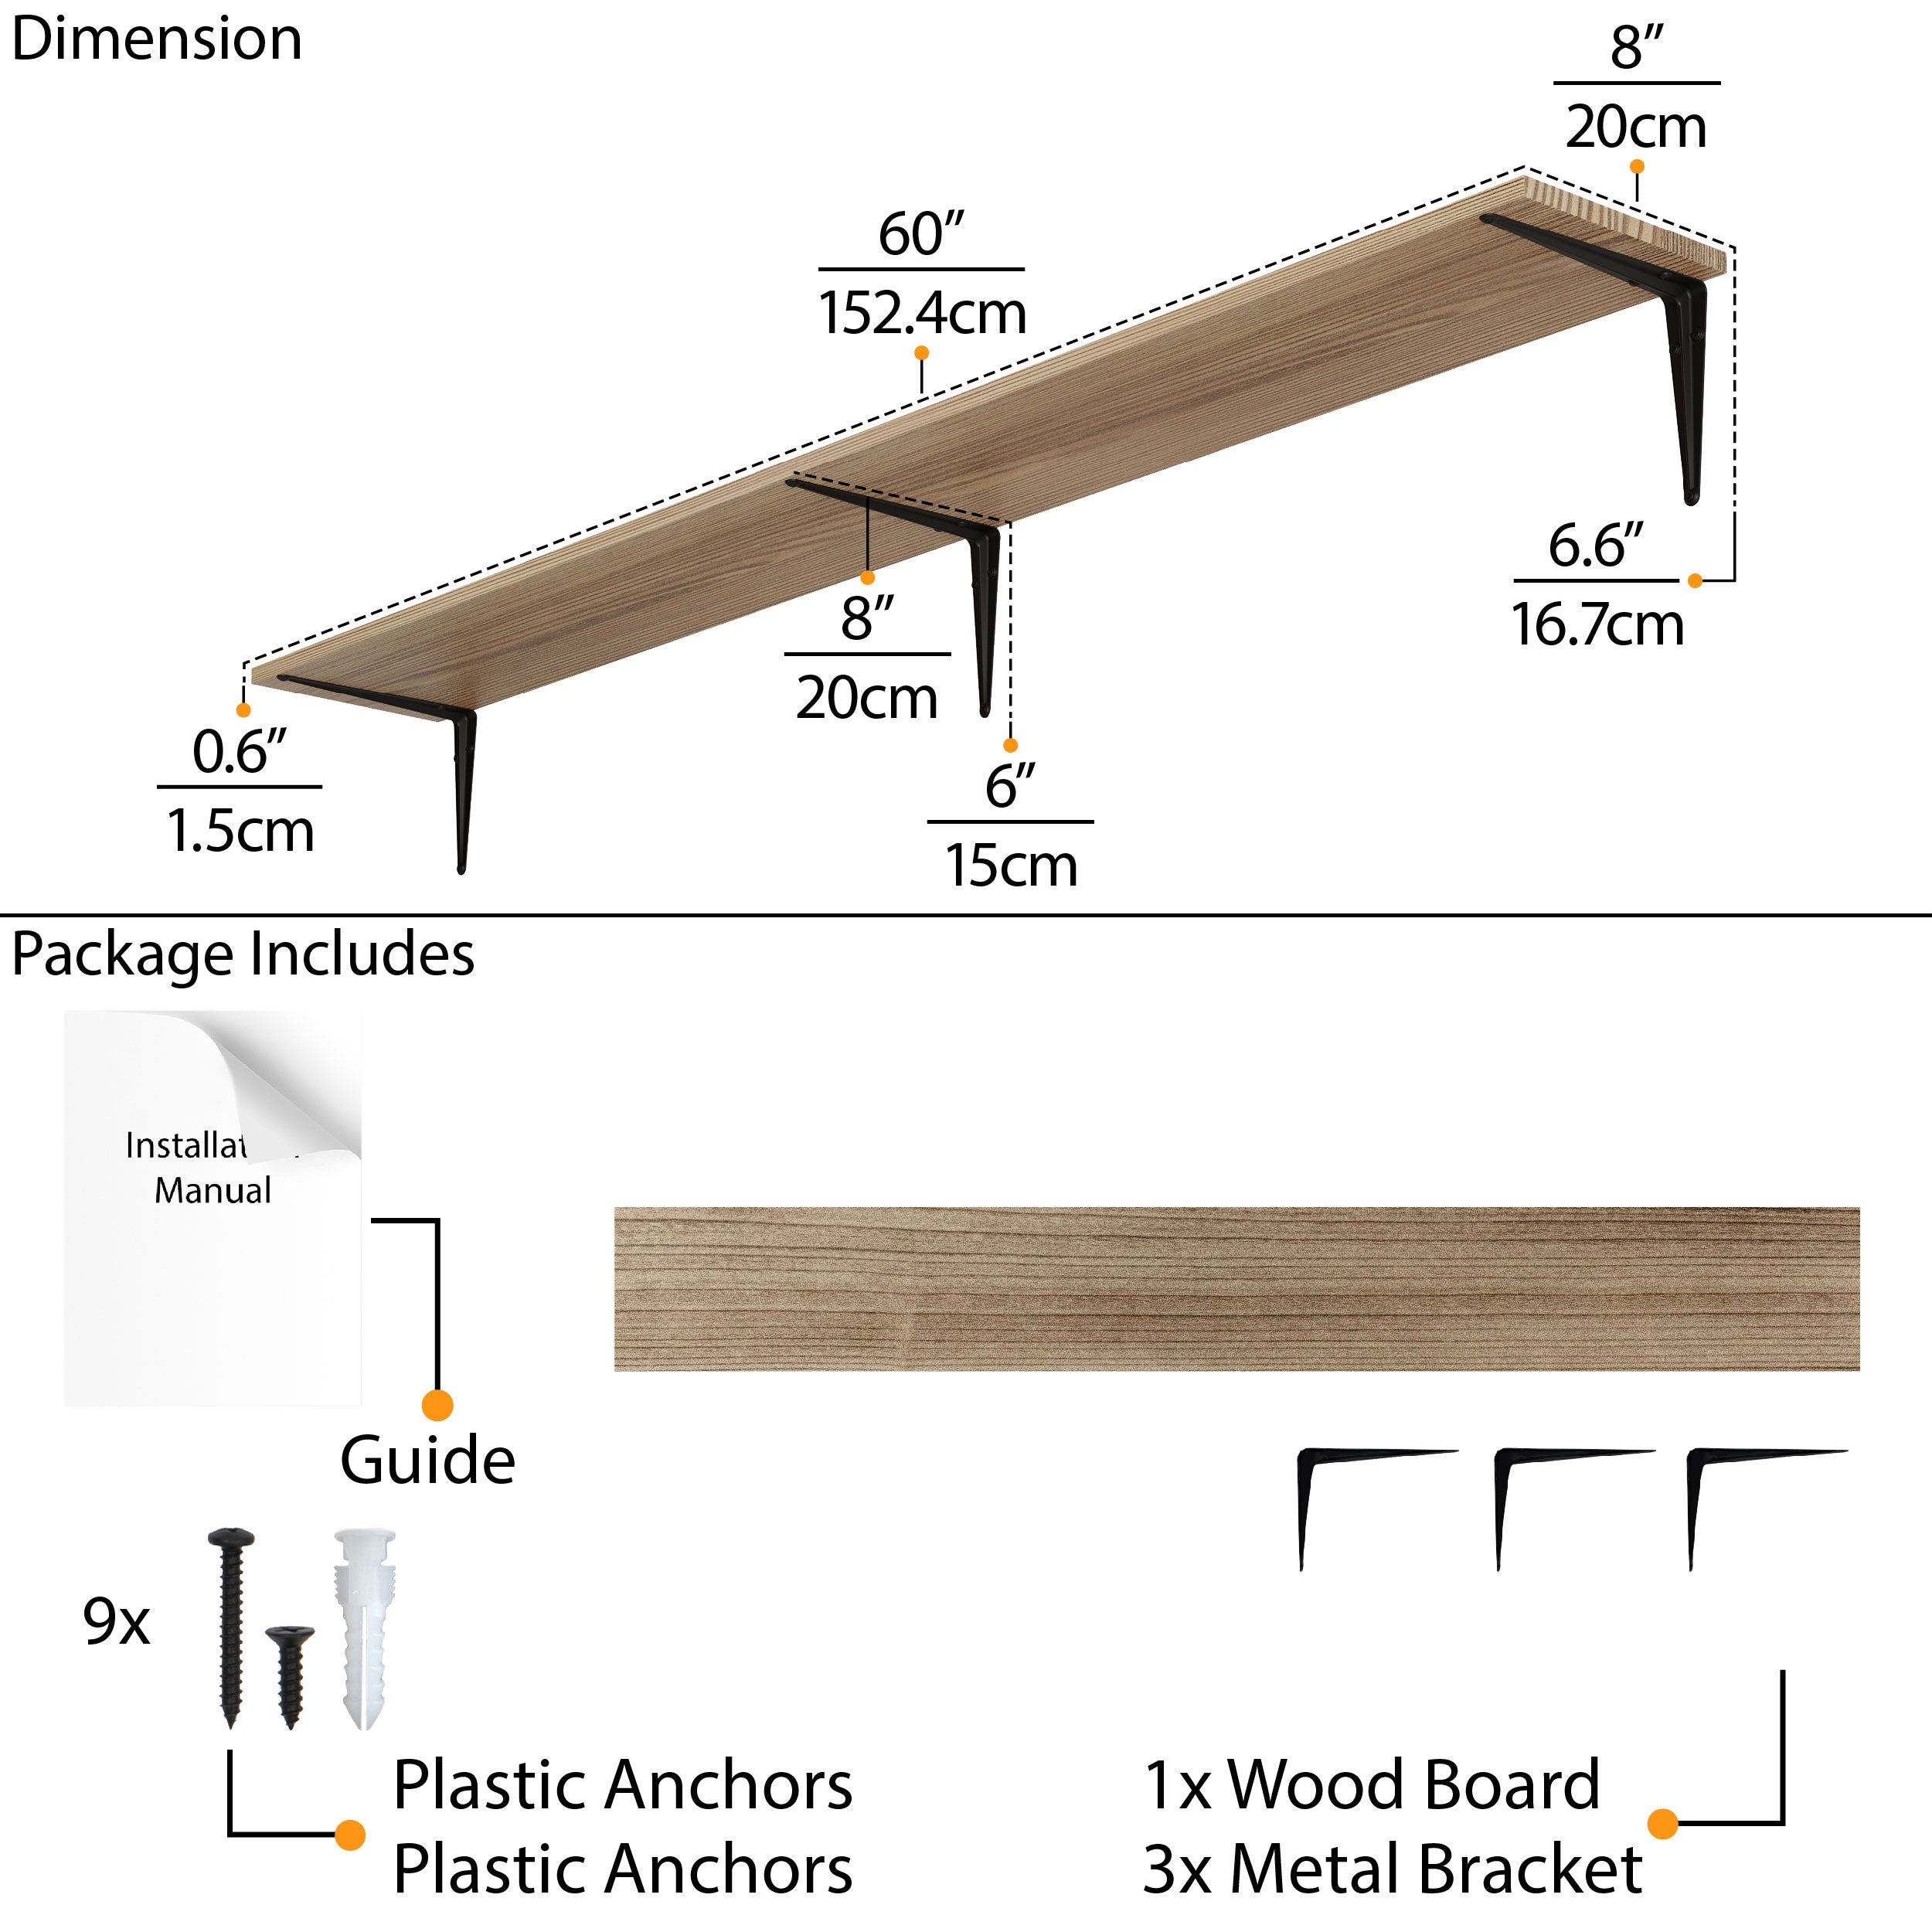 Detailed illustration showing the dimensions and contents of an 60 inch floating shelf burnt kit including screws, brackets, and an installation guide.